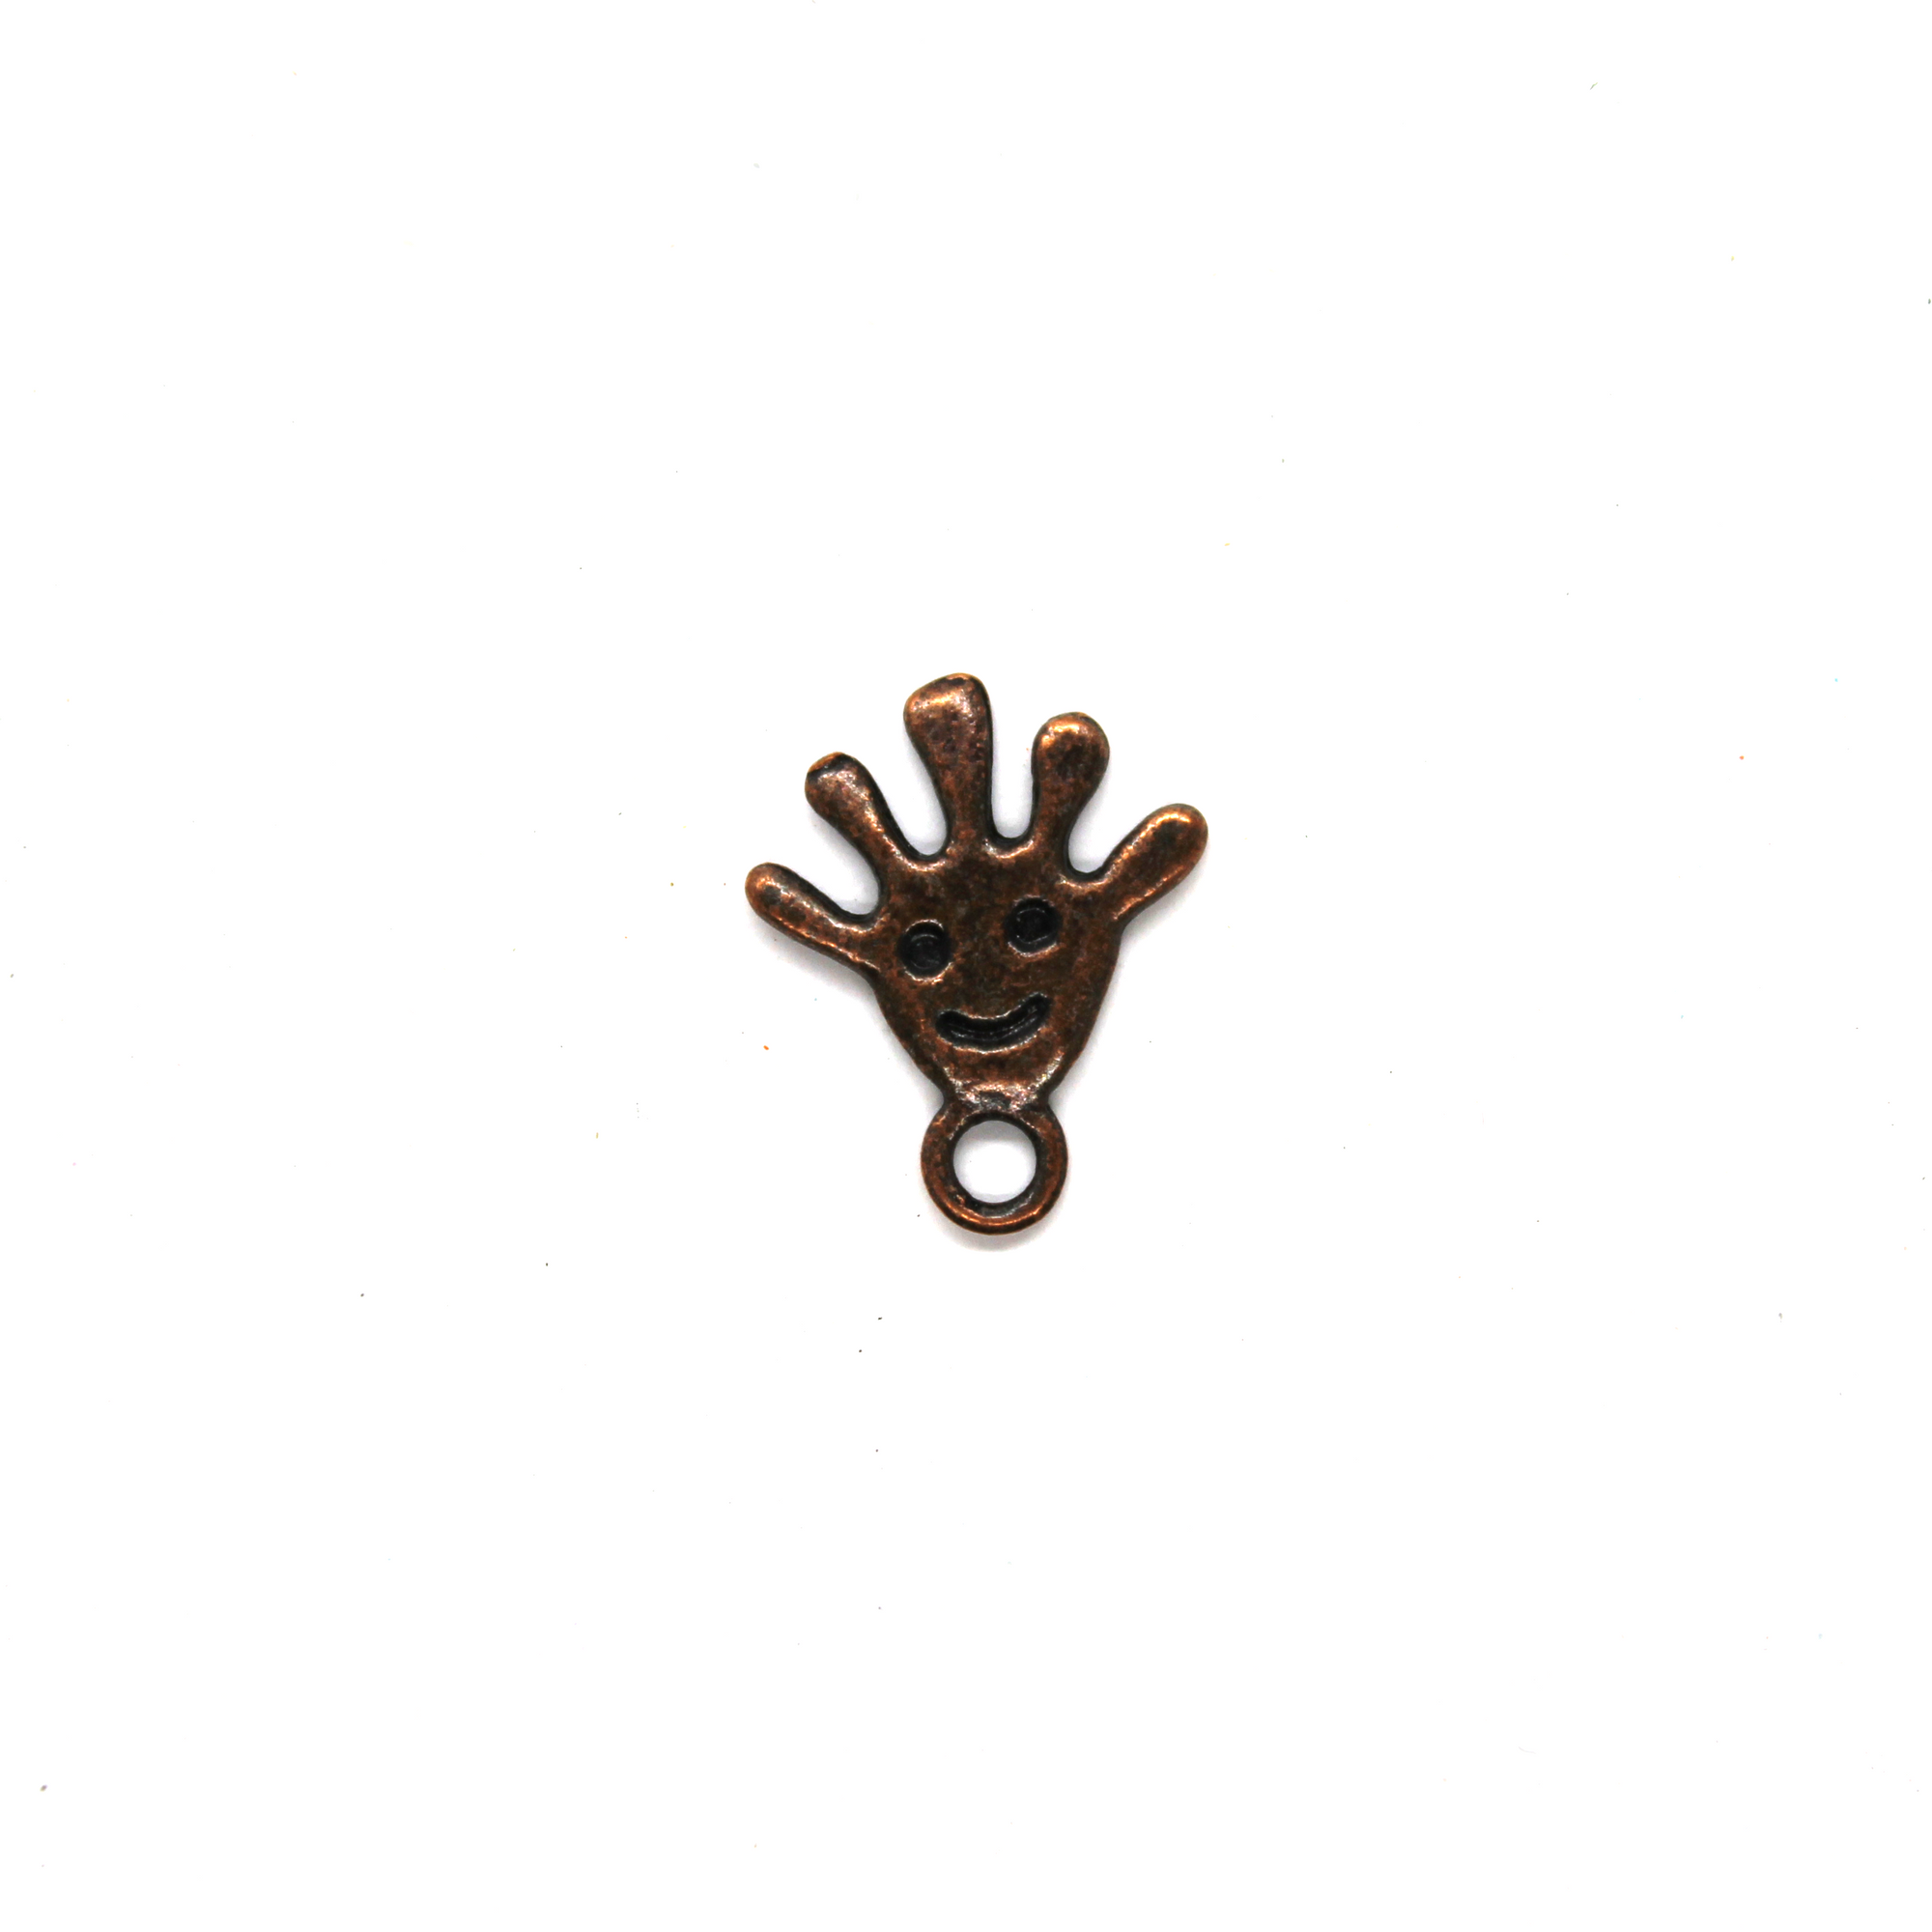 Charms, Smiley Face Hand, Copper, Alloy, 17mm X 14mm, Sold Per pkg of 10